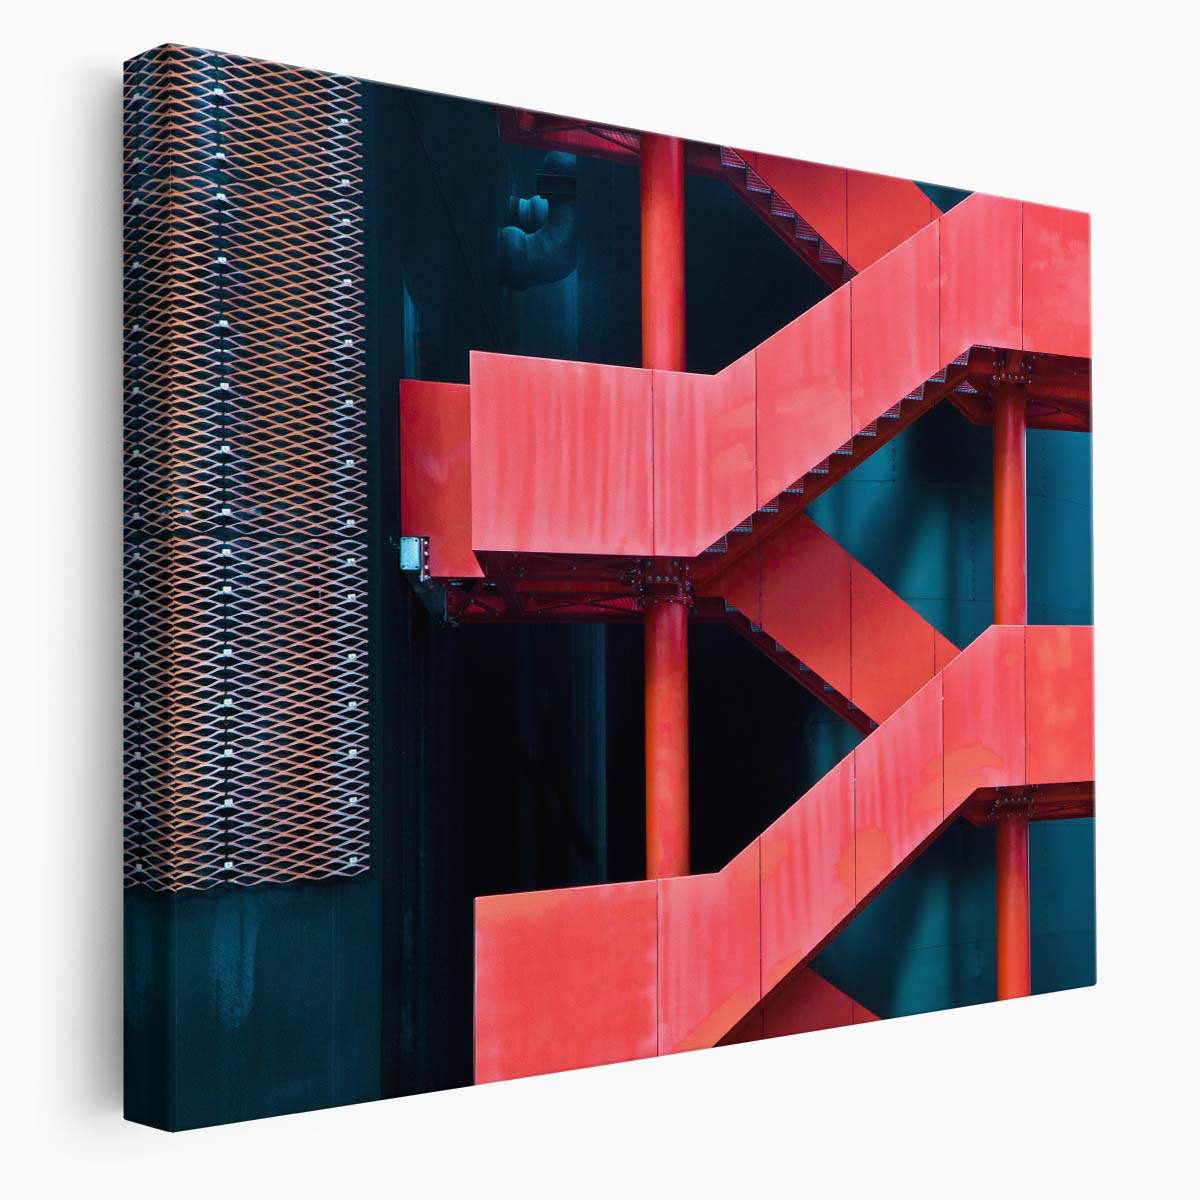 Rusty Red Staircase Geometry London Wall Art by Luxuriance Designs. Made in USA.